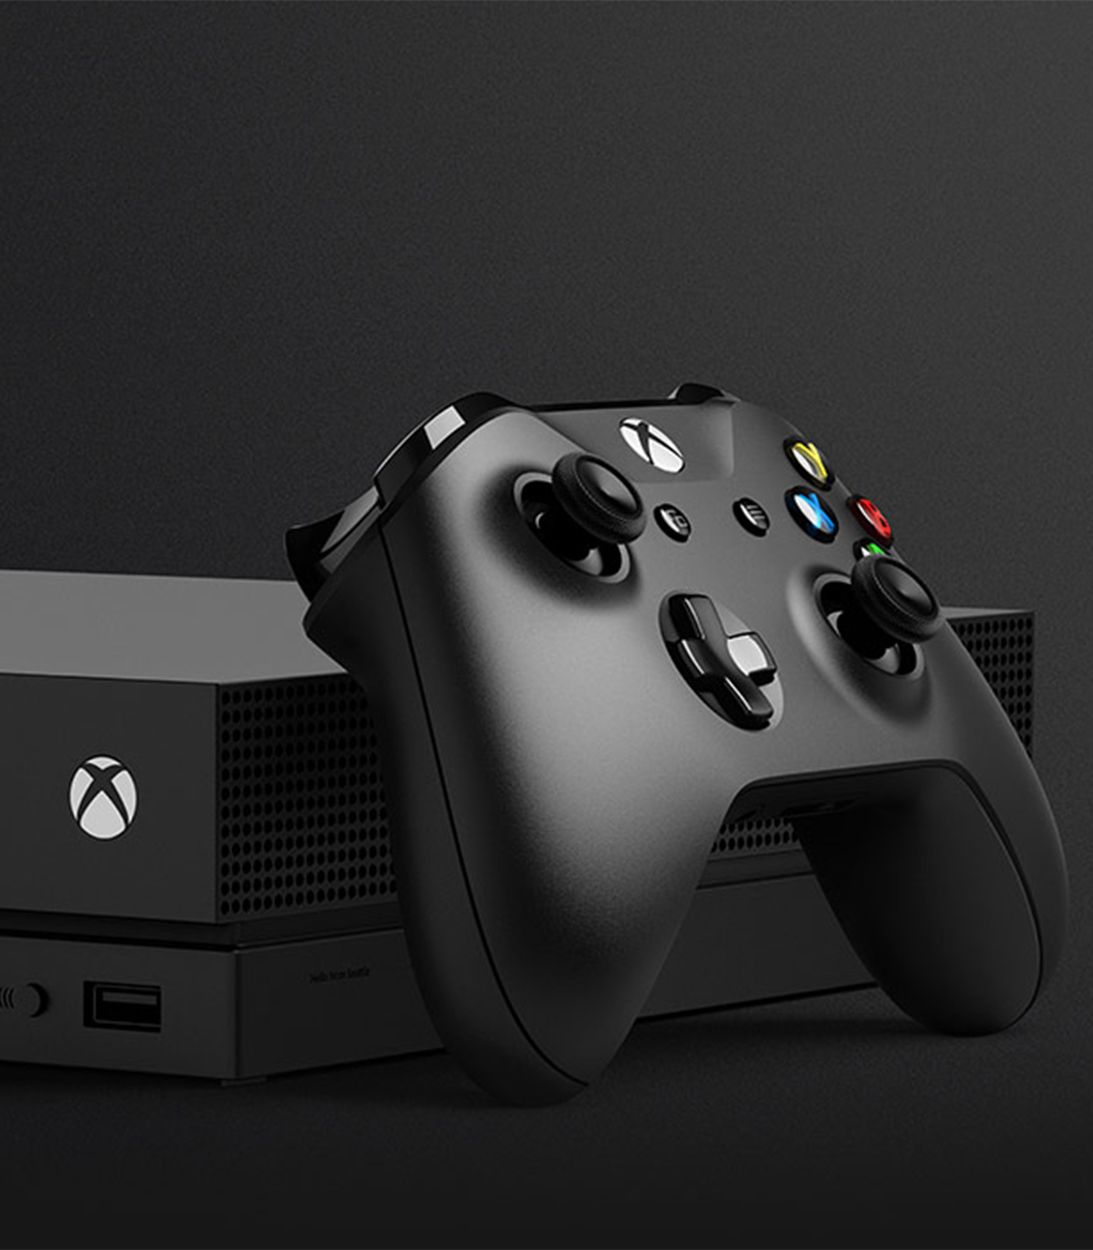 Xbox One X and Controller - Vertical